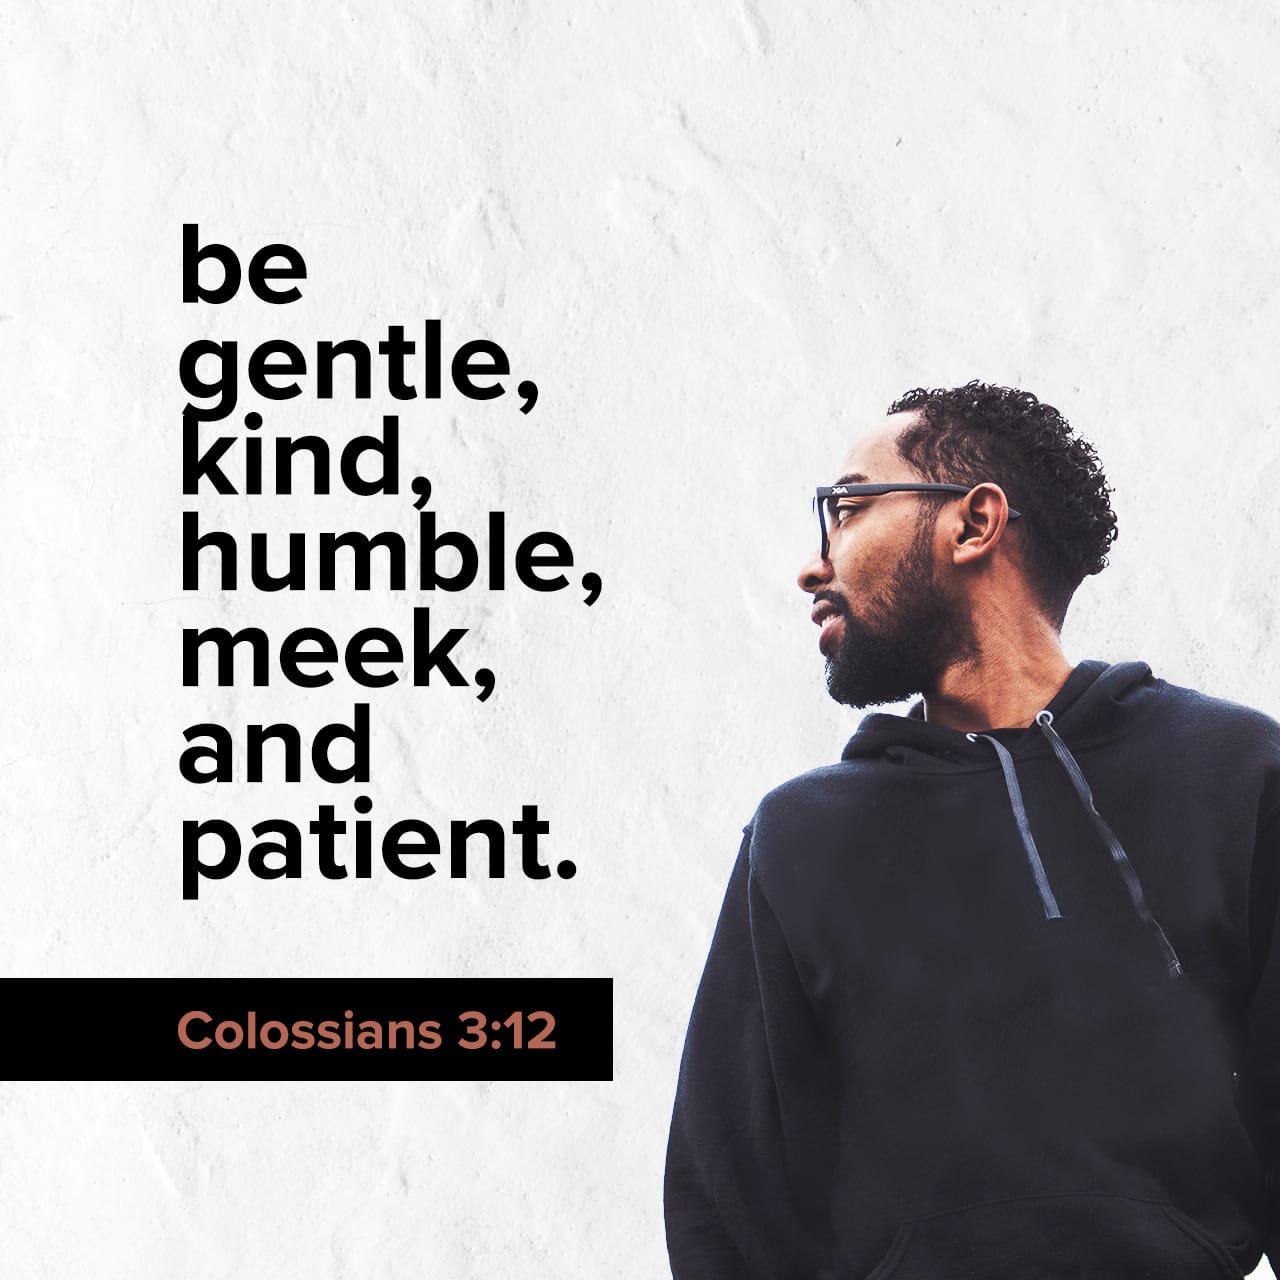 Bible Verse of the Day - day 148 - image 42328 (Colossians 3:12)